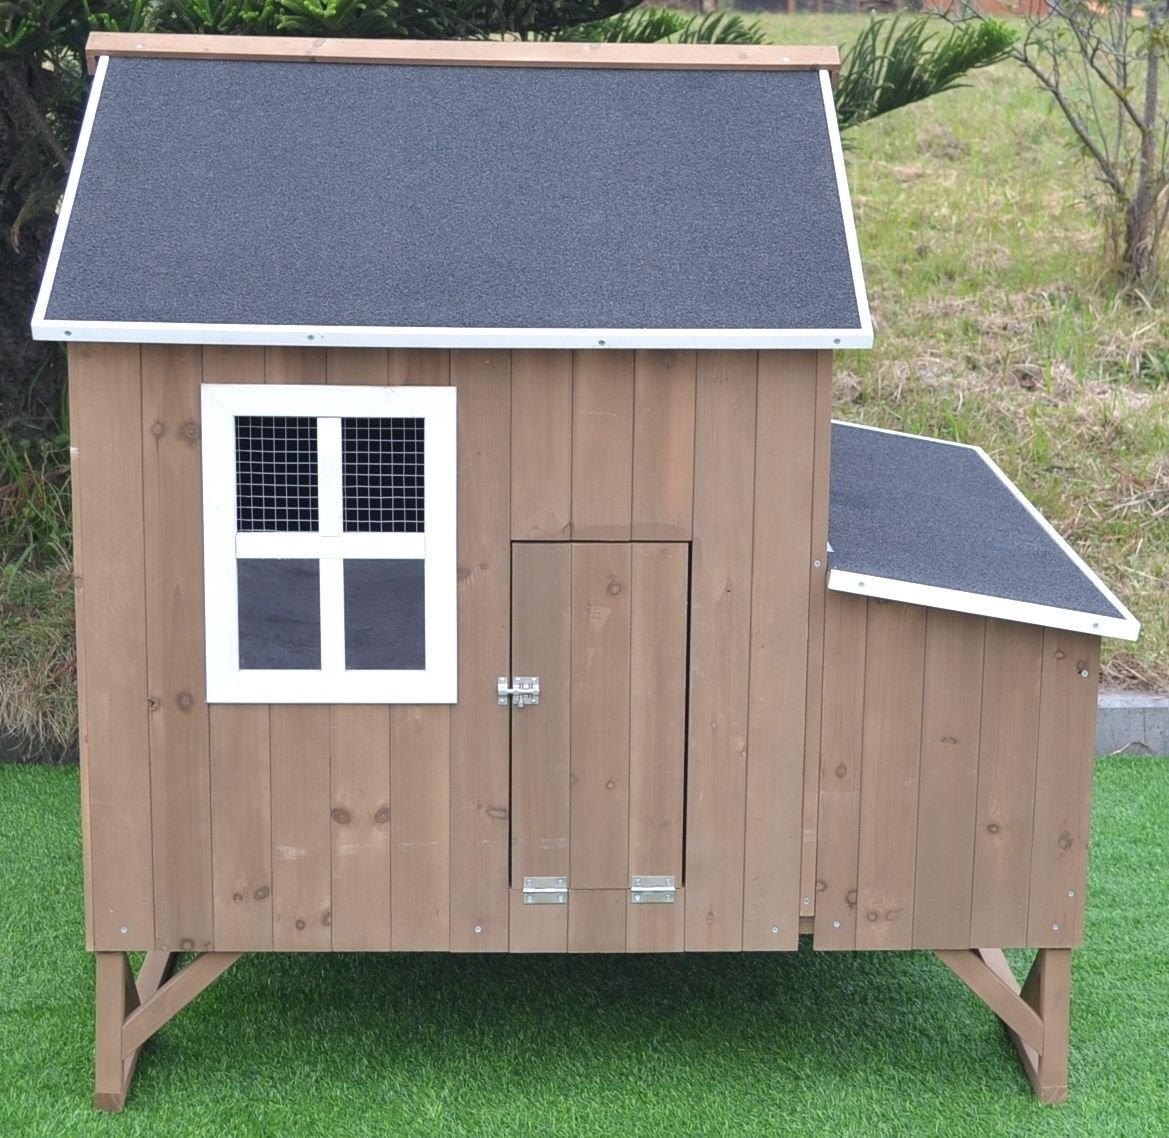 Omitree Deluxe Large Wood Chicken Coop Backyard Hen House 4-8 Chickens with 3 Nesting Box